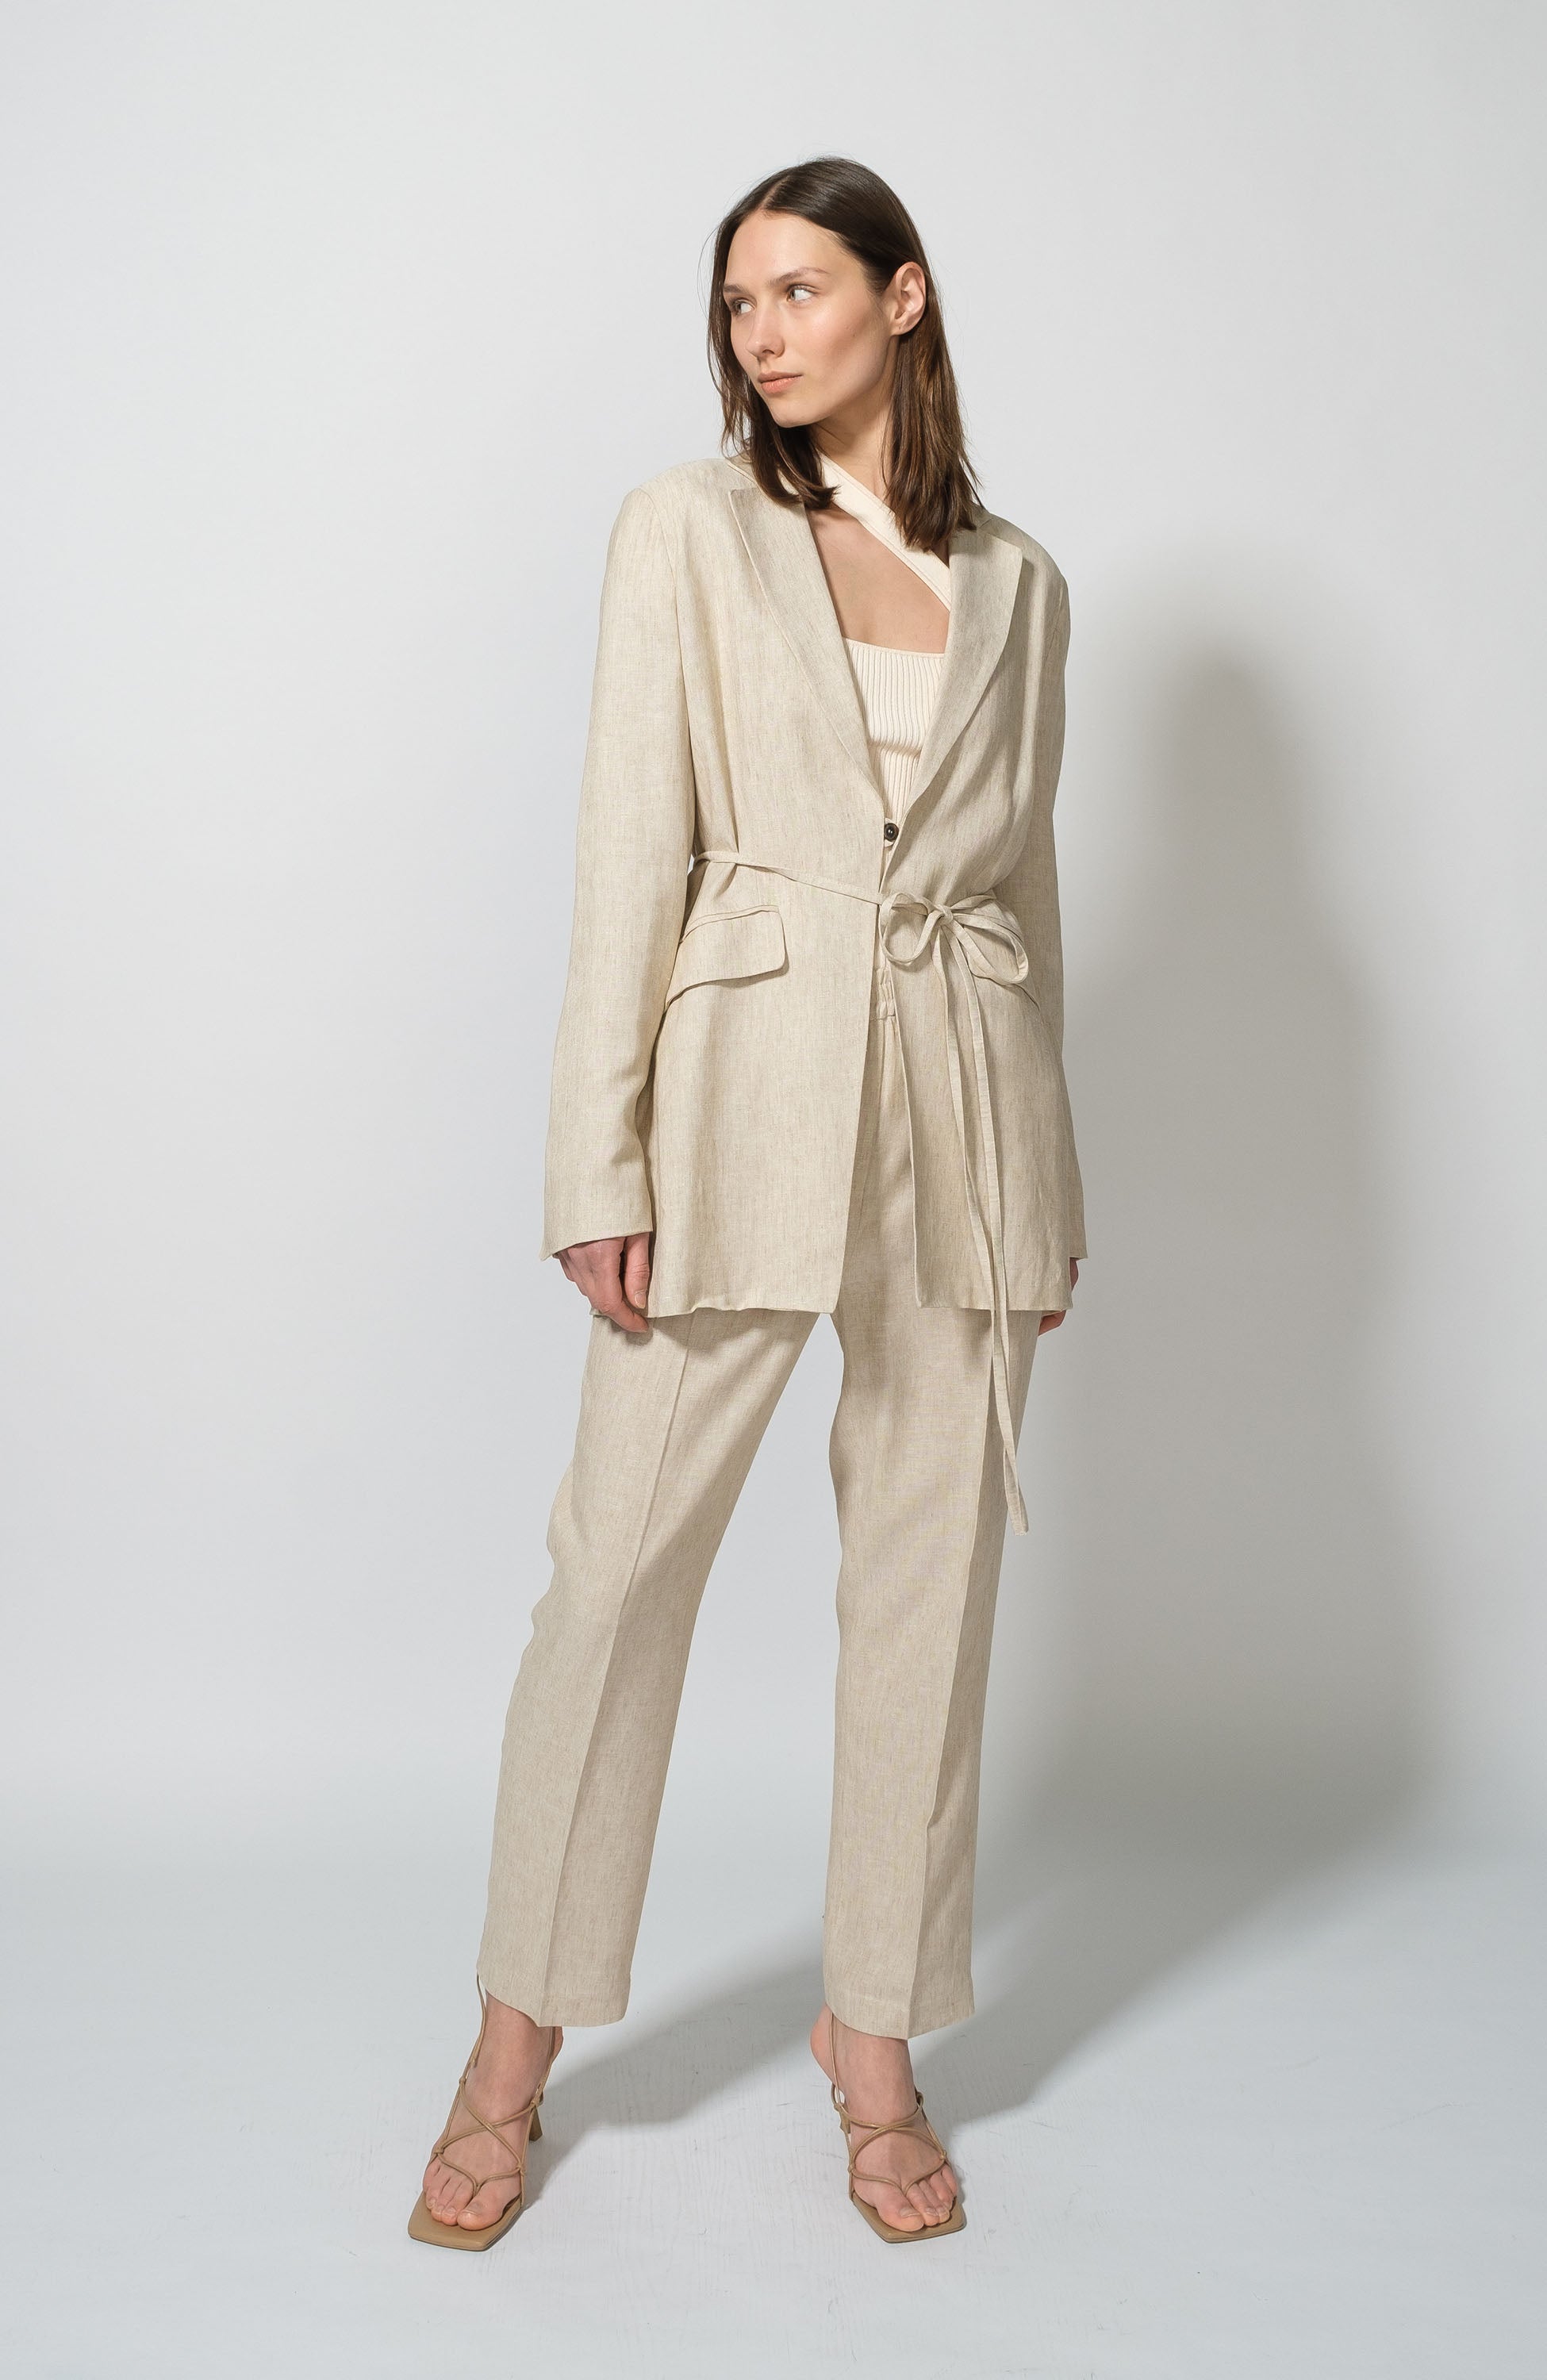 Straight linen trousers